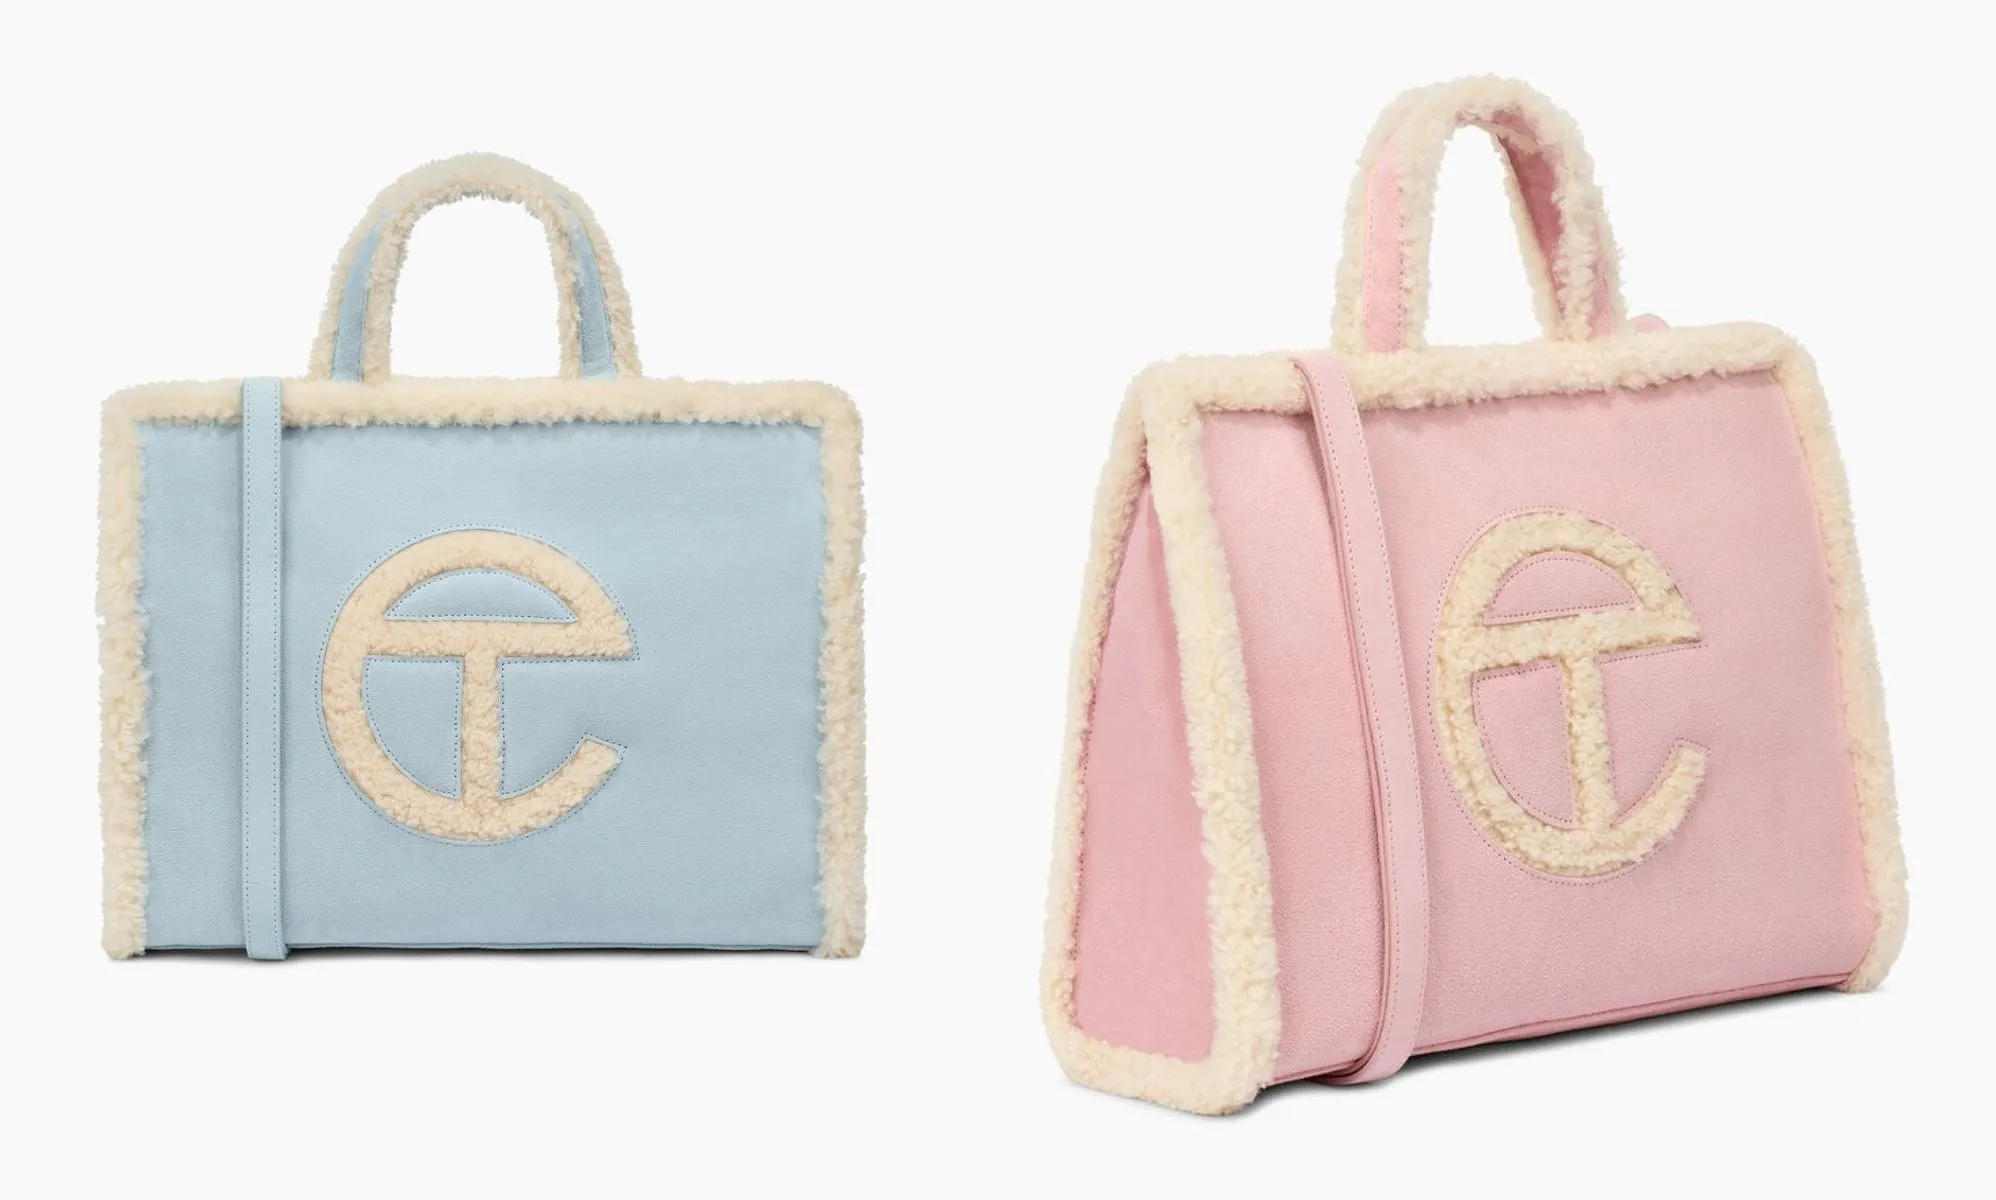 Ugg x Telfar release new collection featuring pastel shopper bags